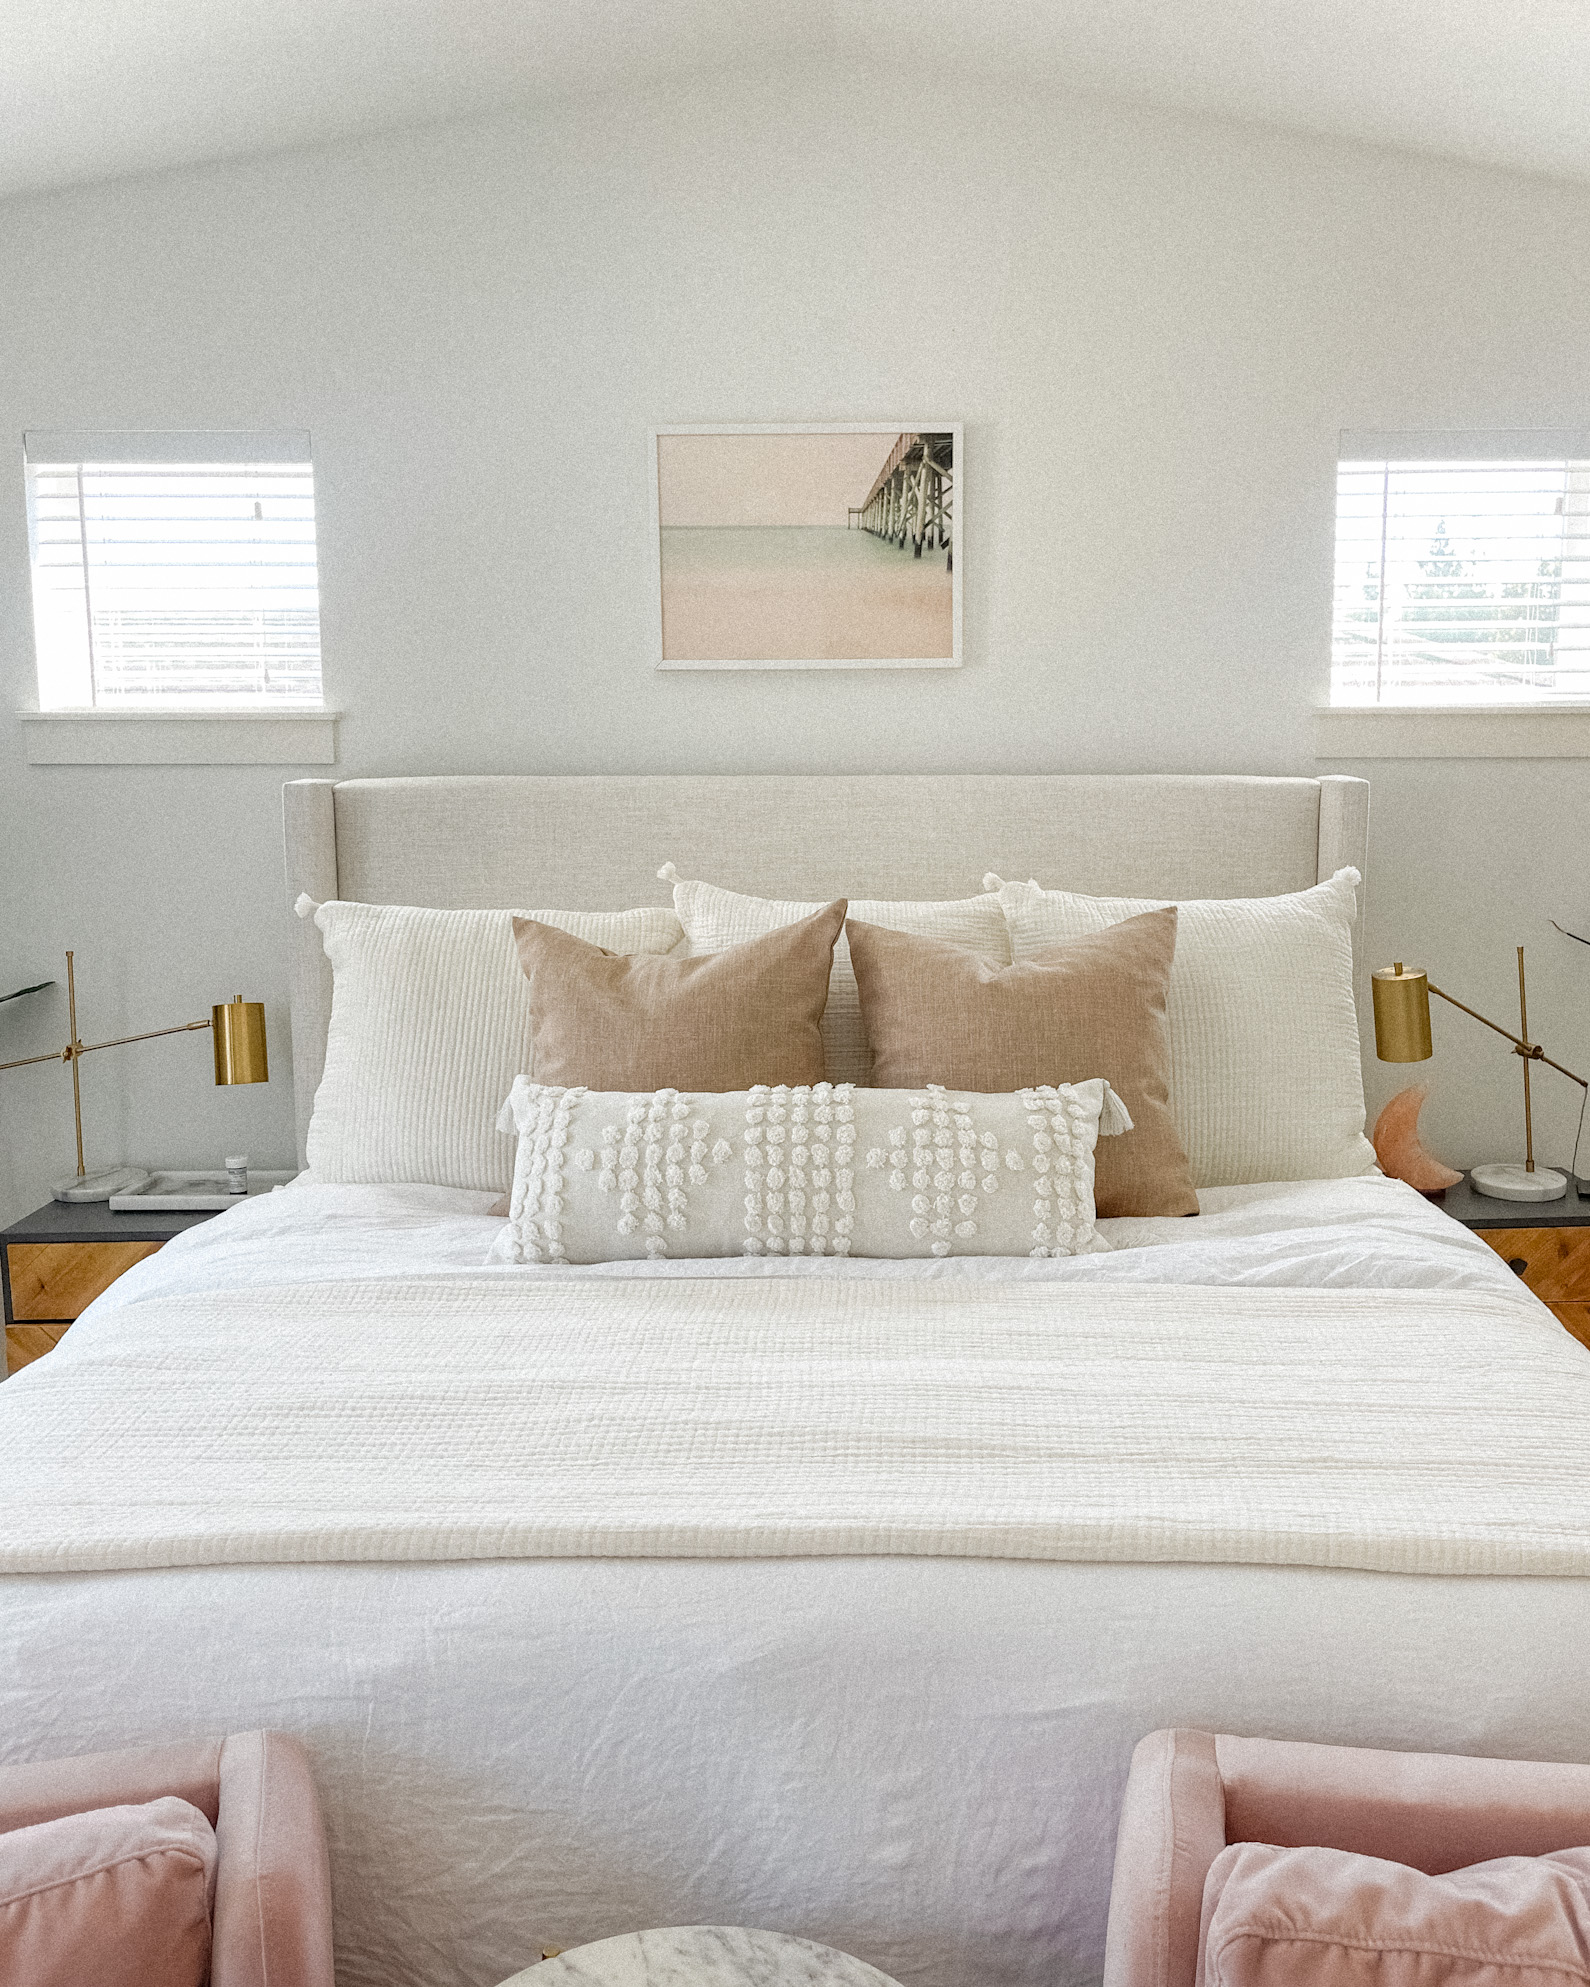 How To Arrange Pillows On A King Bed, What Size Pillows For King Bed